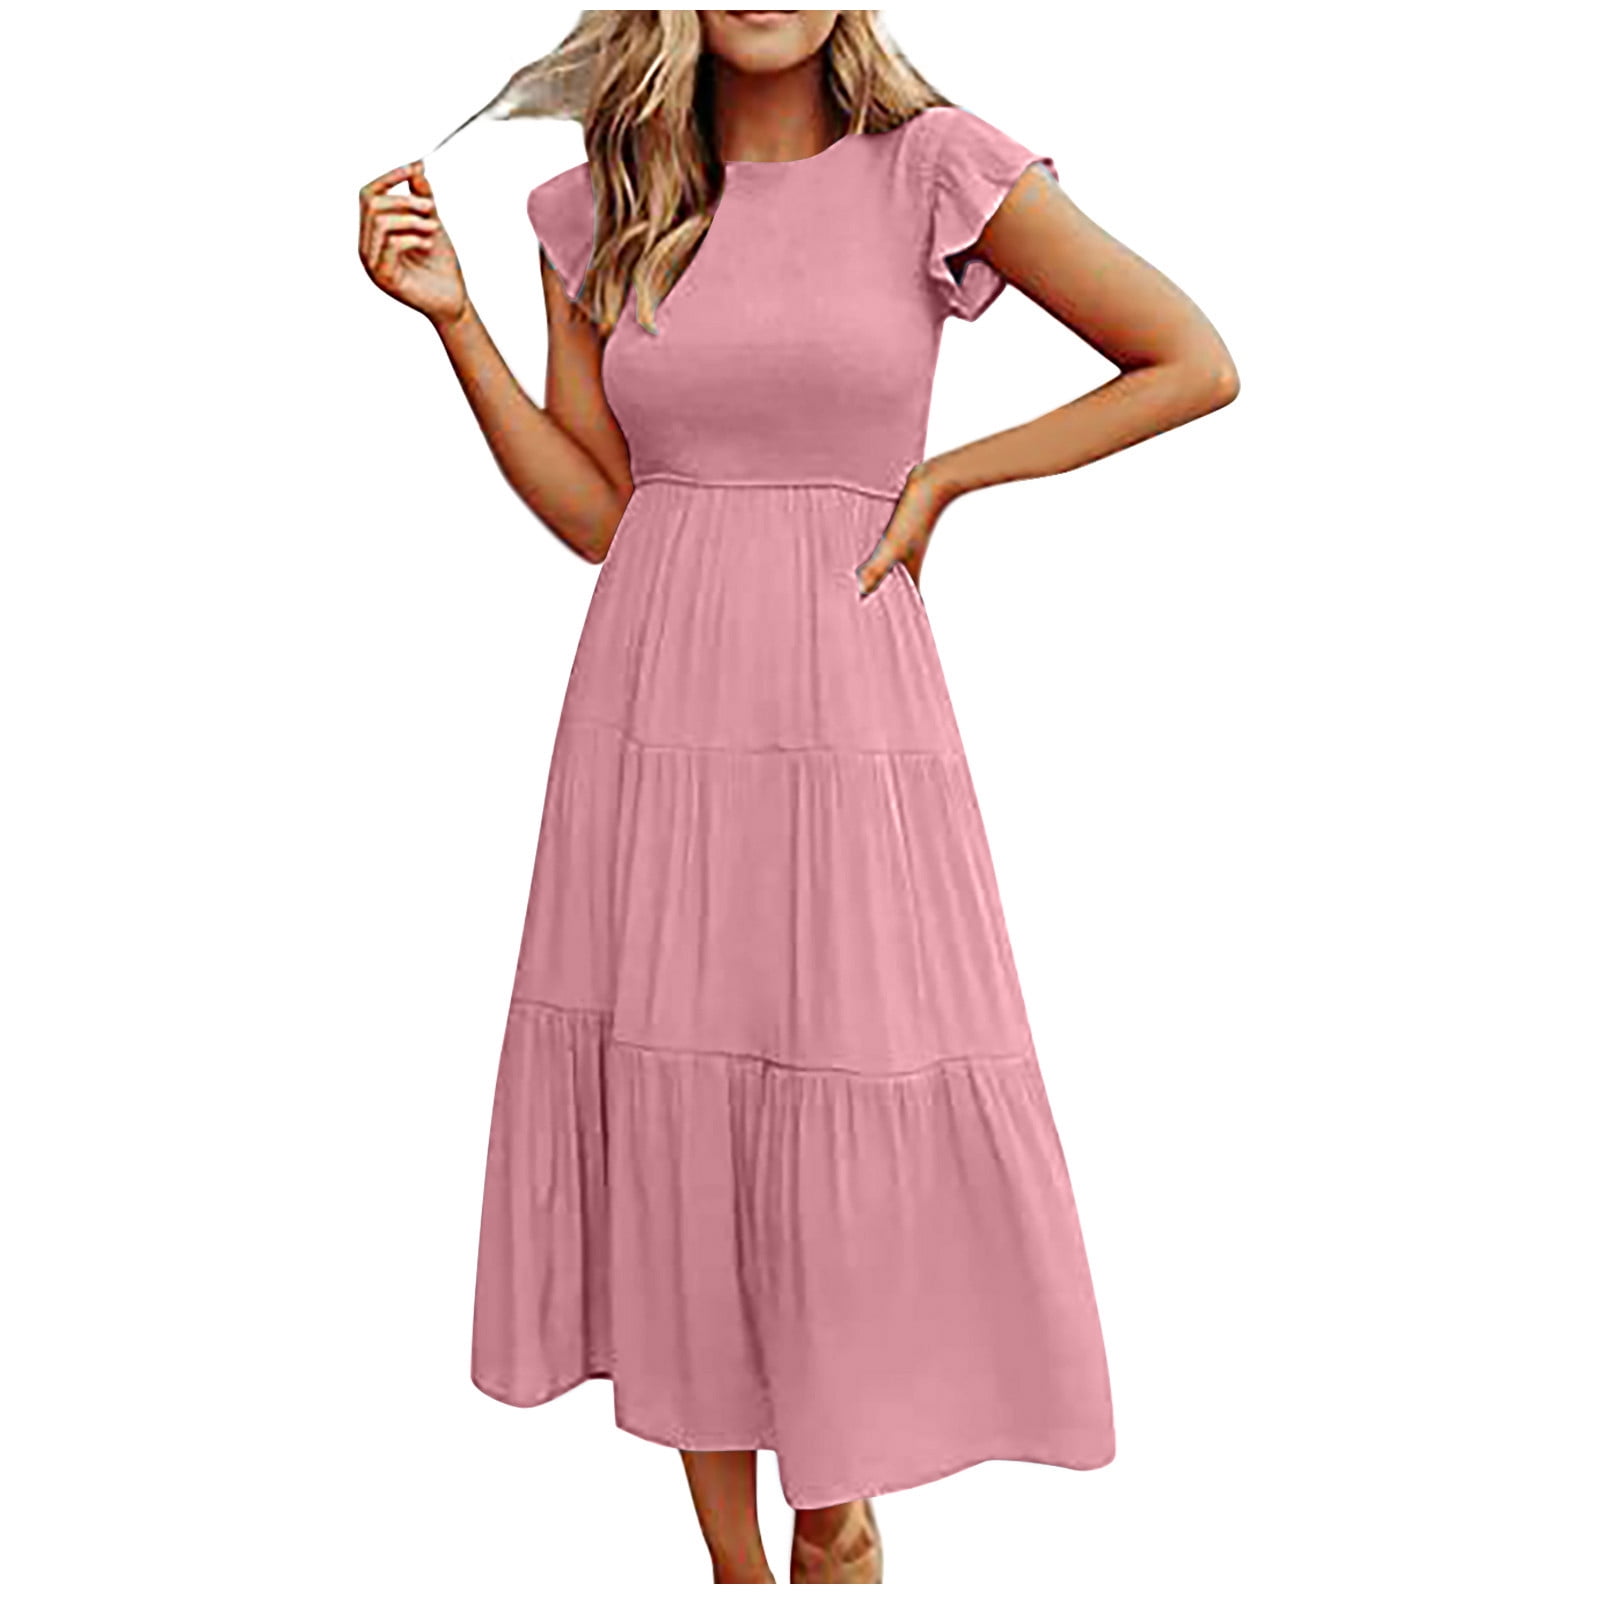 Dyegold Sundresses for Women Casual Beach - Maxi Summer Dresses for ...